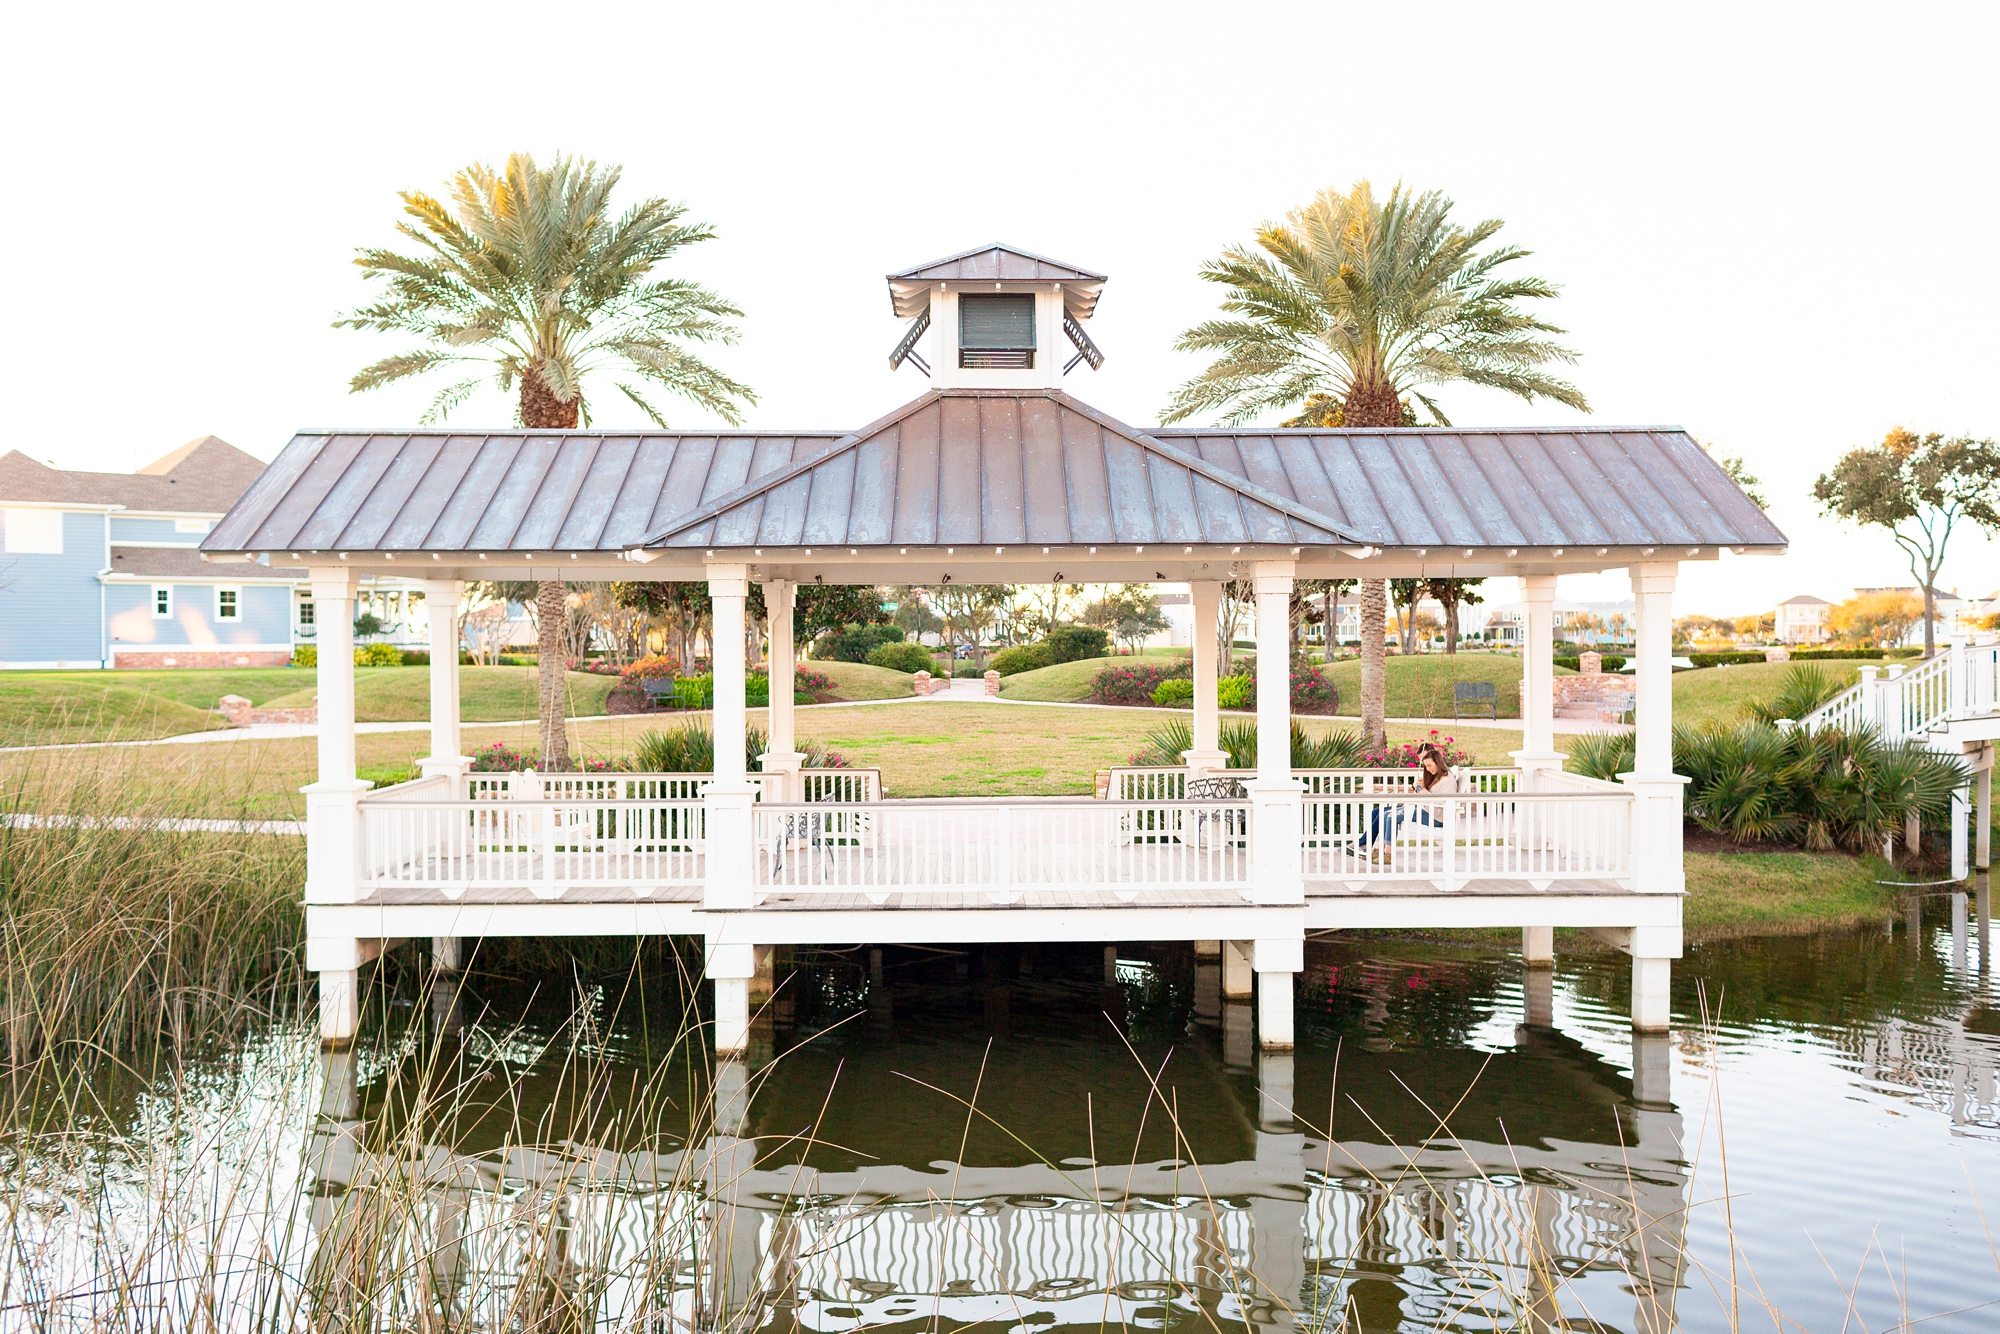 Covered pavilion Galveston engagement session photo locations in the Evia community